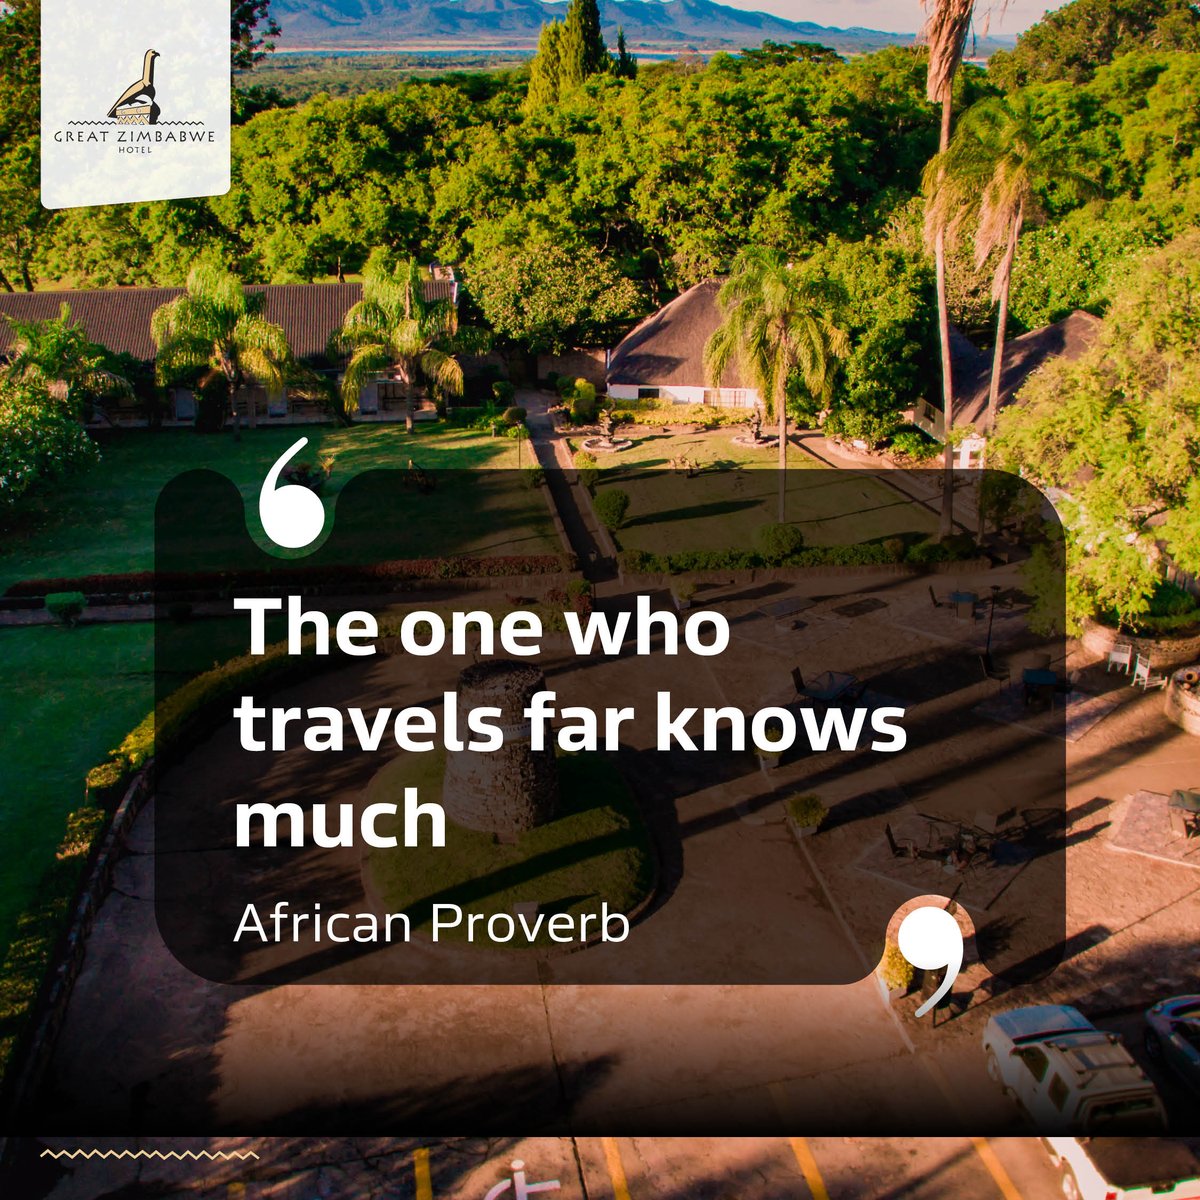 Traveling is a transformative teacher. Stay with us as you learn about the amazing Zimbabwean heritage ​
Book on: reservations@gzim.africansun.co.zw to make a reservation.​

#Travel  #Heritage   #GreatZimbabwe    #GreatZimbabweHotel #ProudlyAfricanSun #ExperienceExploreEnjoy